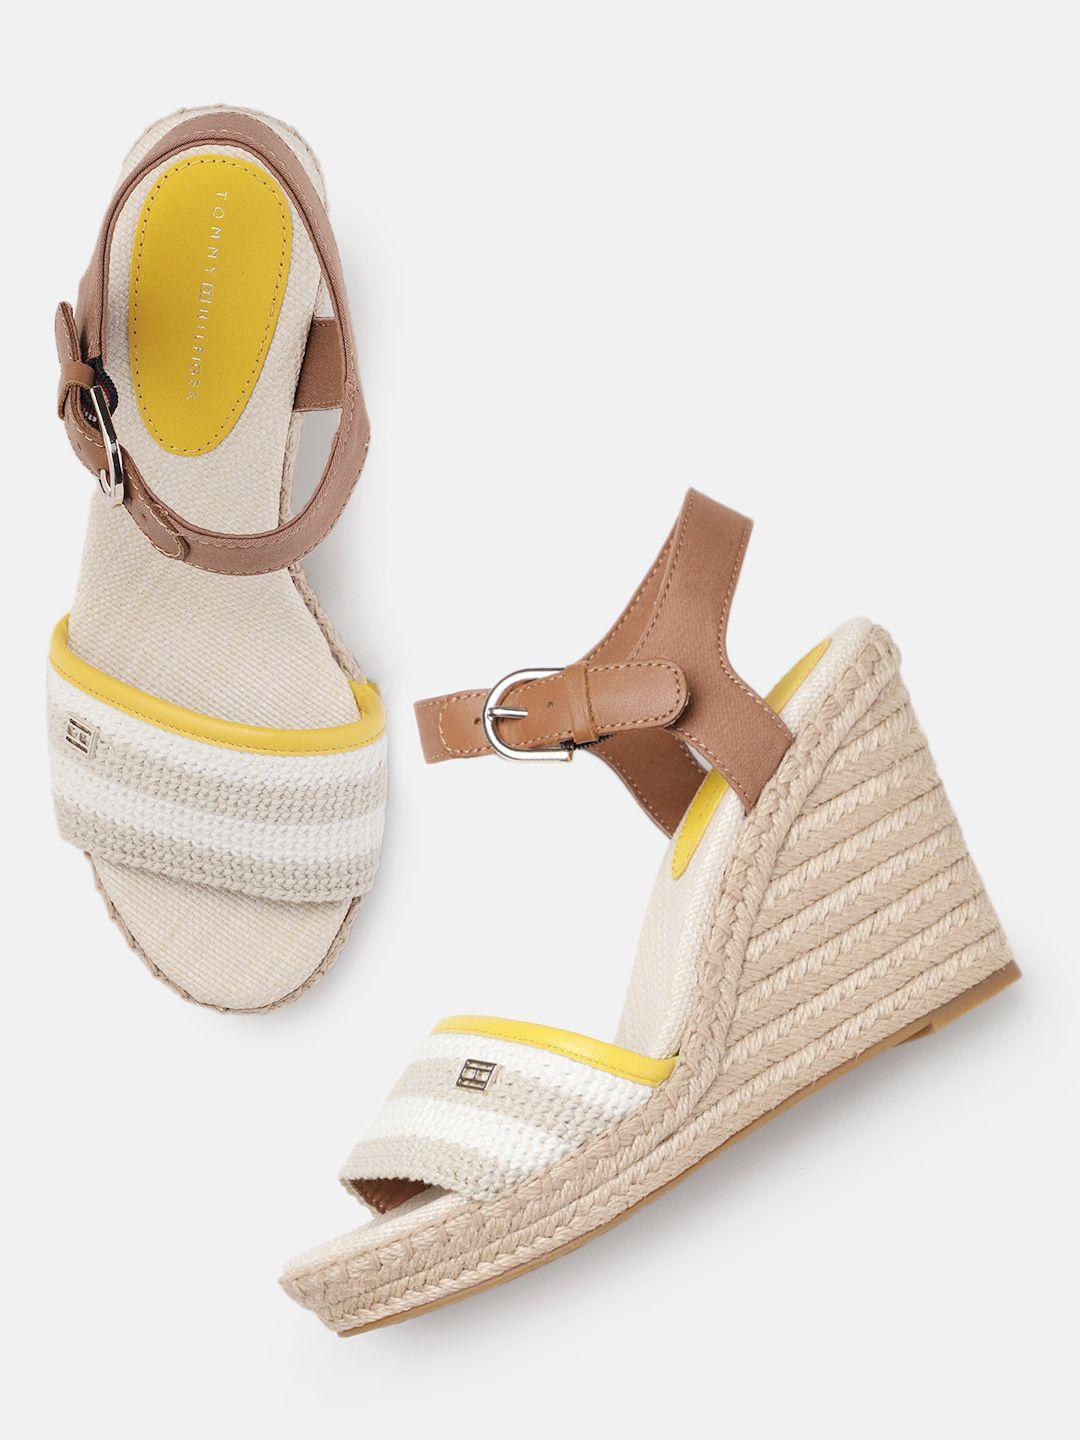 tommy hilfiger women crochet striped wedge sandals with buckle detail